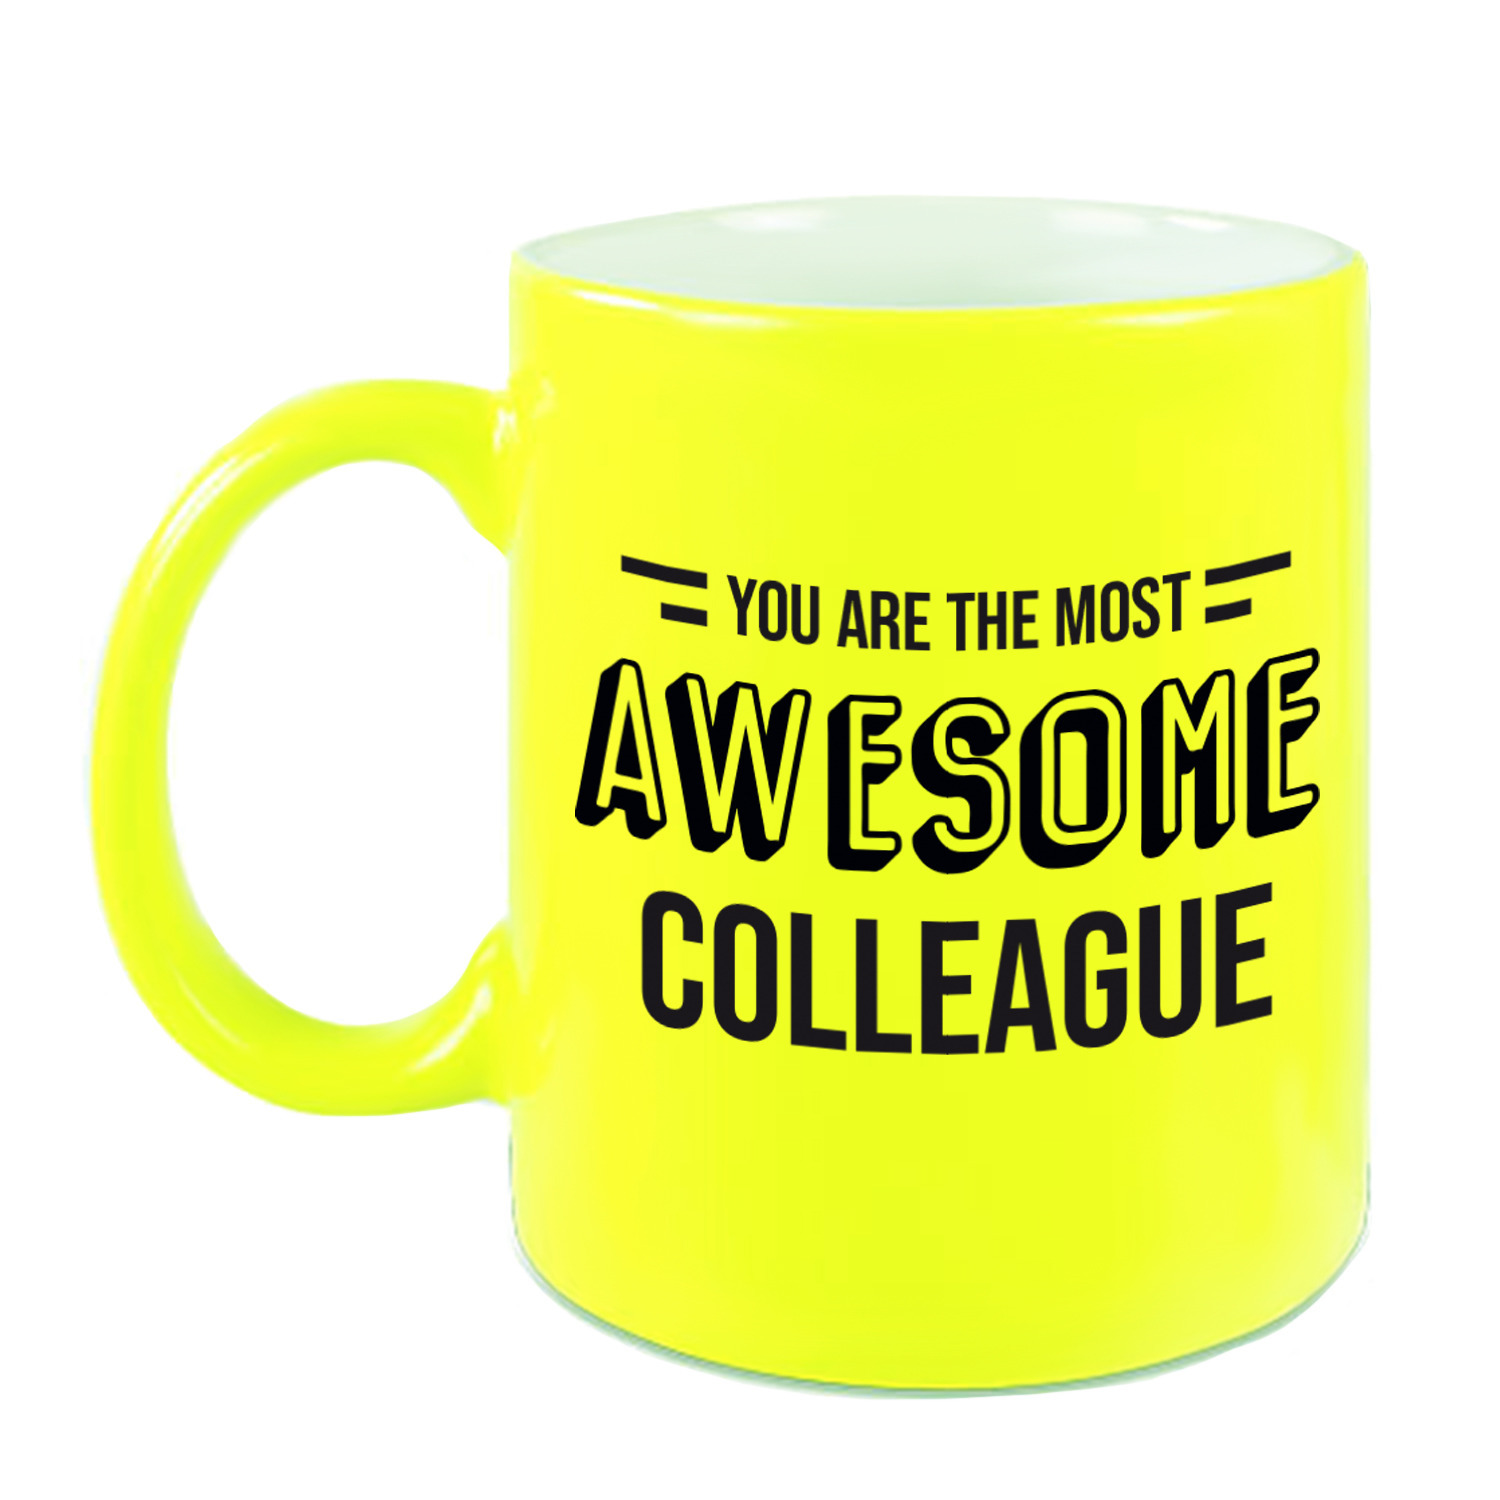 1x stuks collega cadeau mok-beker neon geel the most awesome colleague